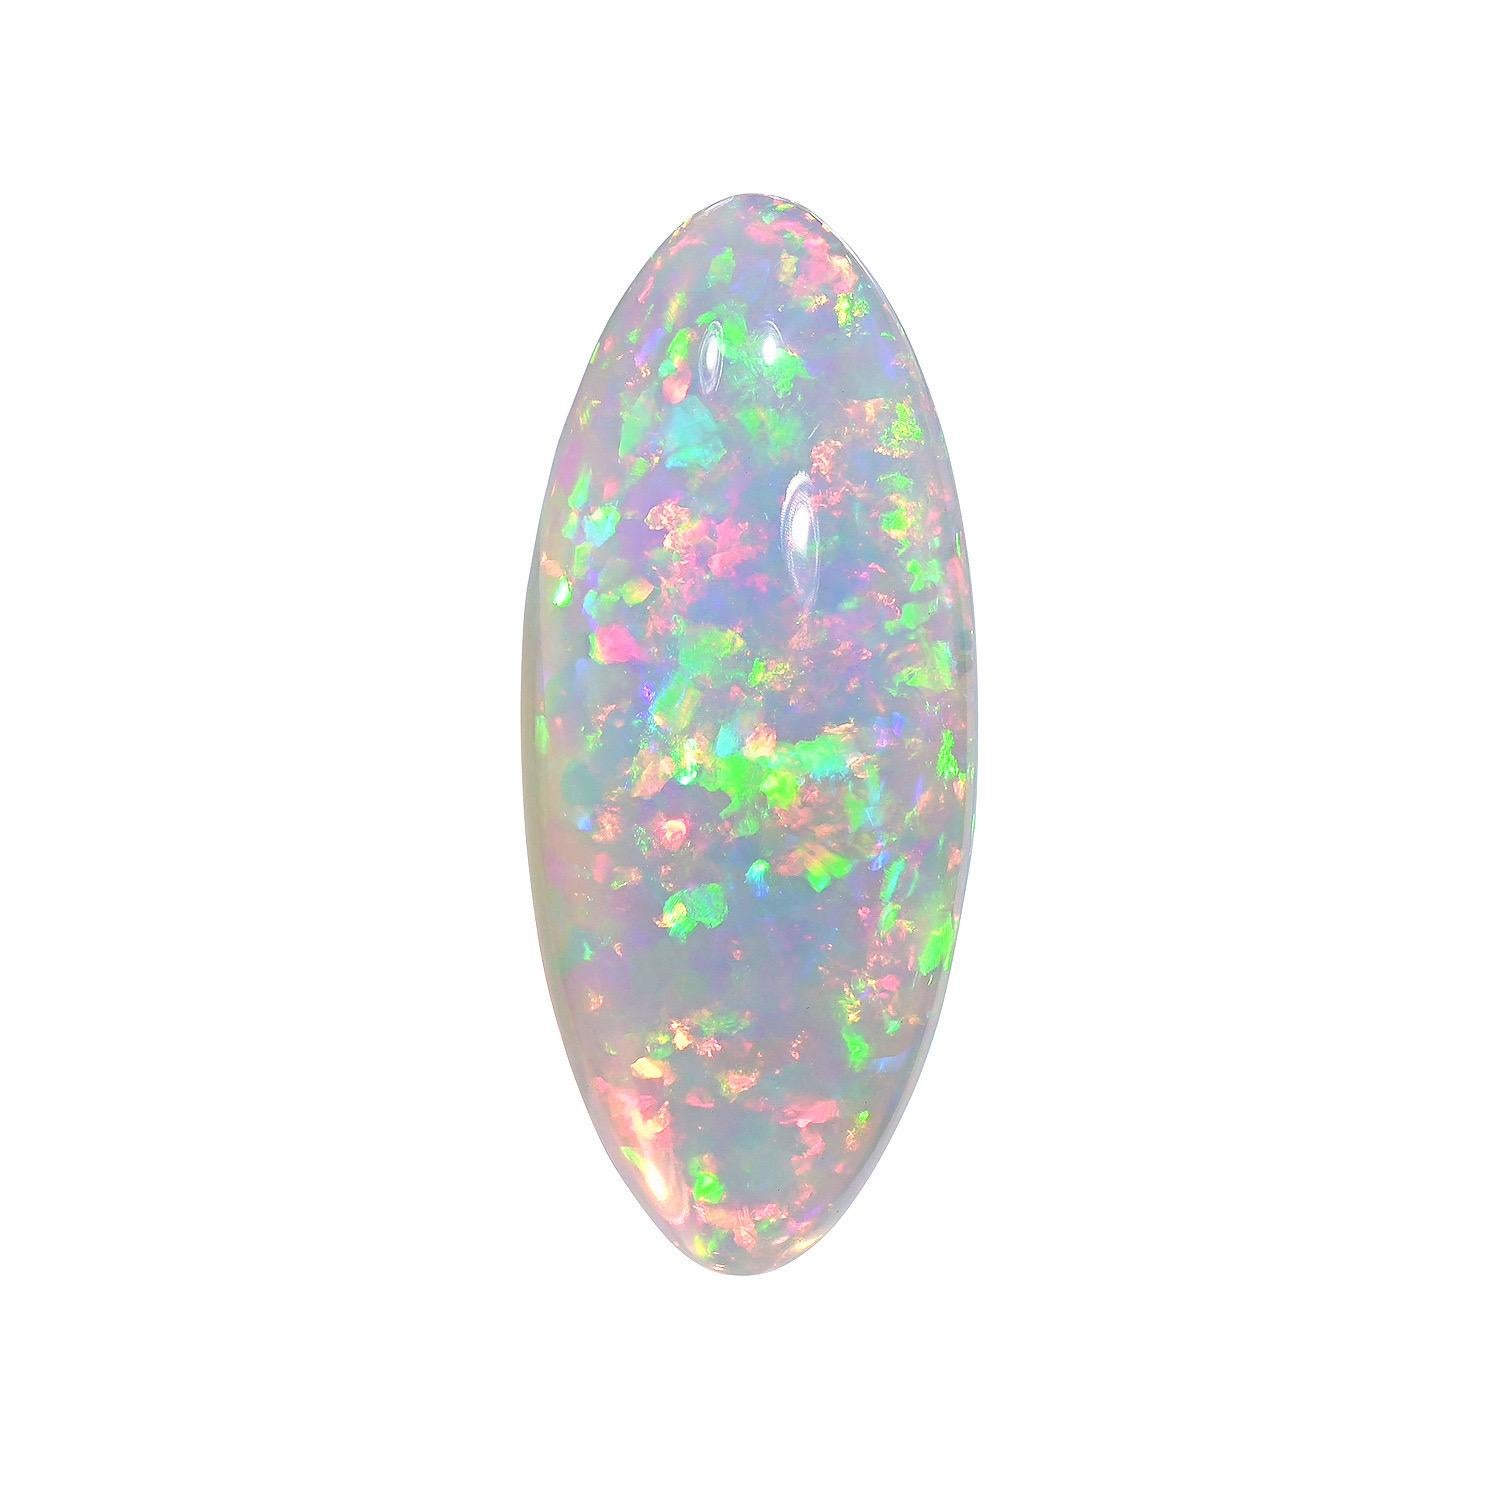 Contemporary Opal Stone 38.92 Carat Natural Ethiopian Marquise loose Gemstone For Sale